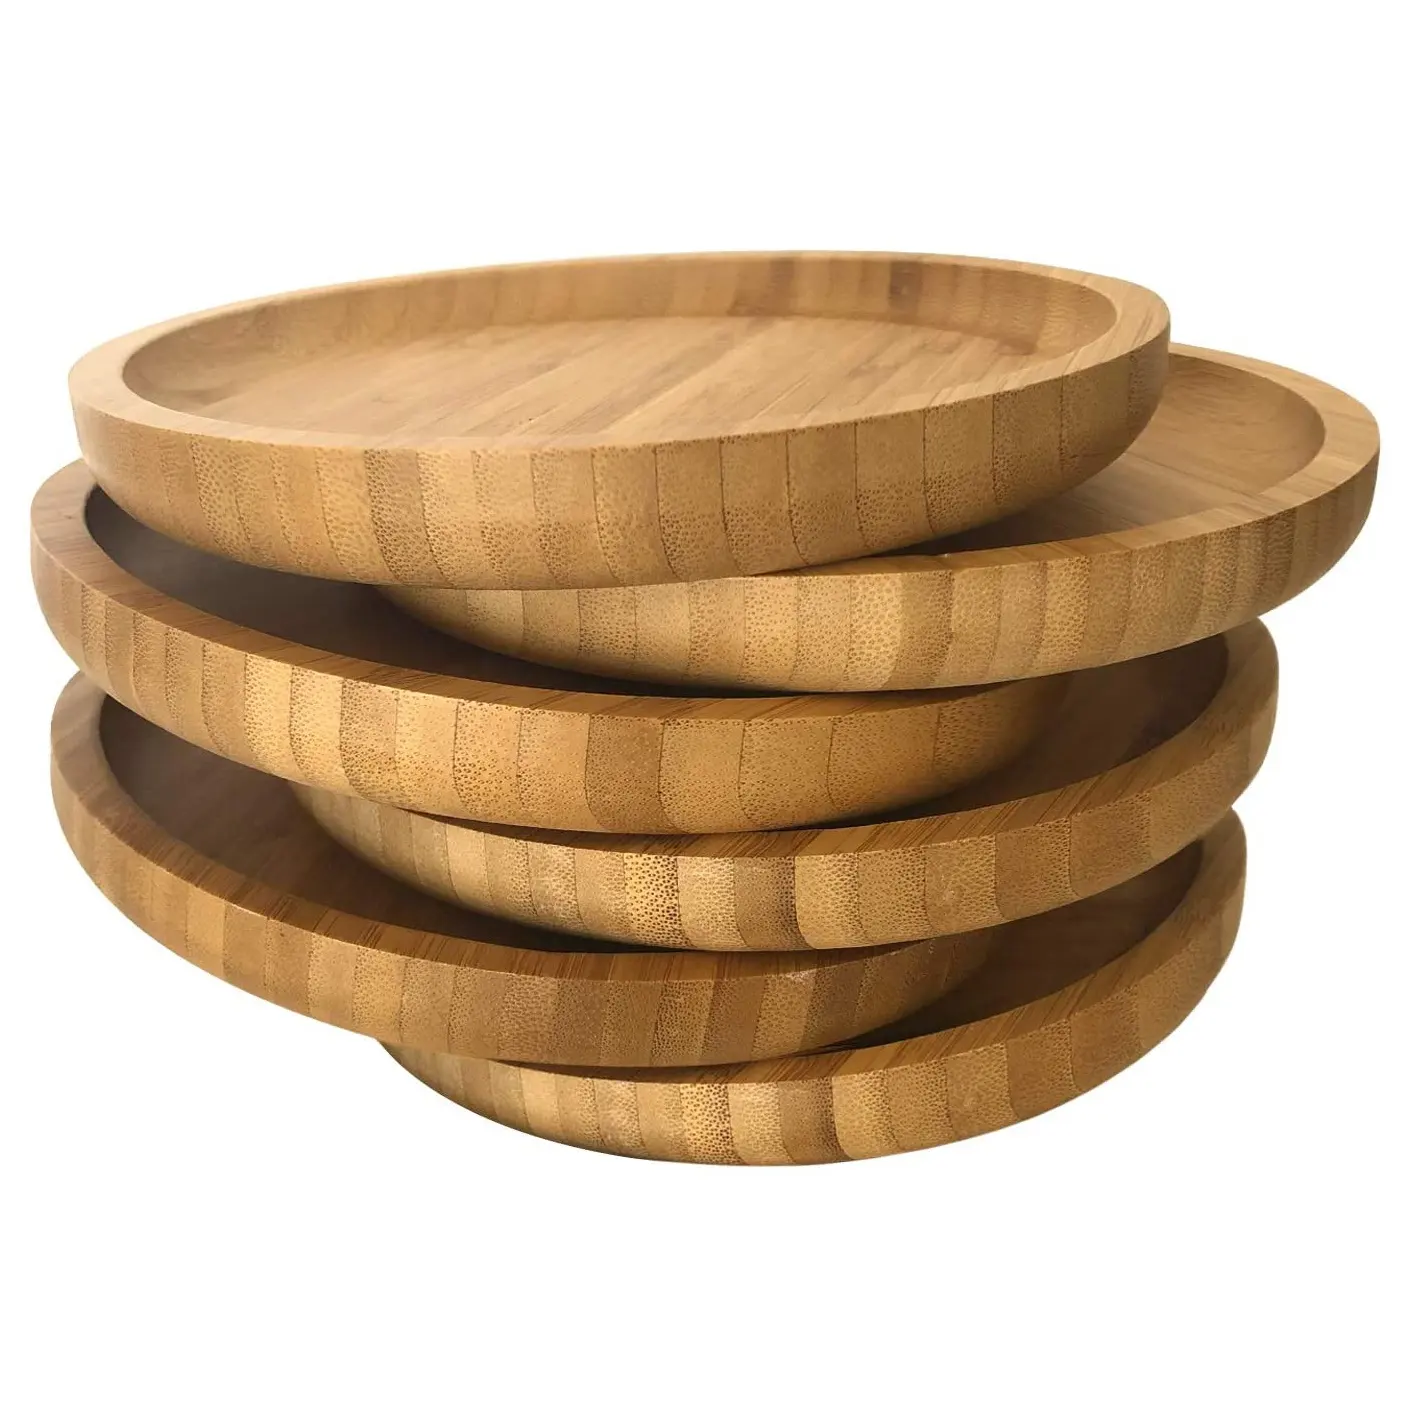 Bamboo Serving Plates Wood Coffee Tea Serving Tray Fruit platters Party Dinner Plates Sour Candy Tray